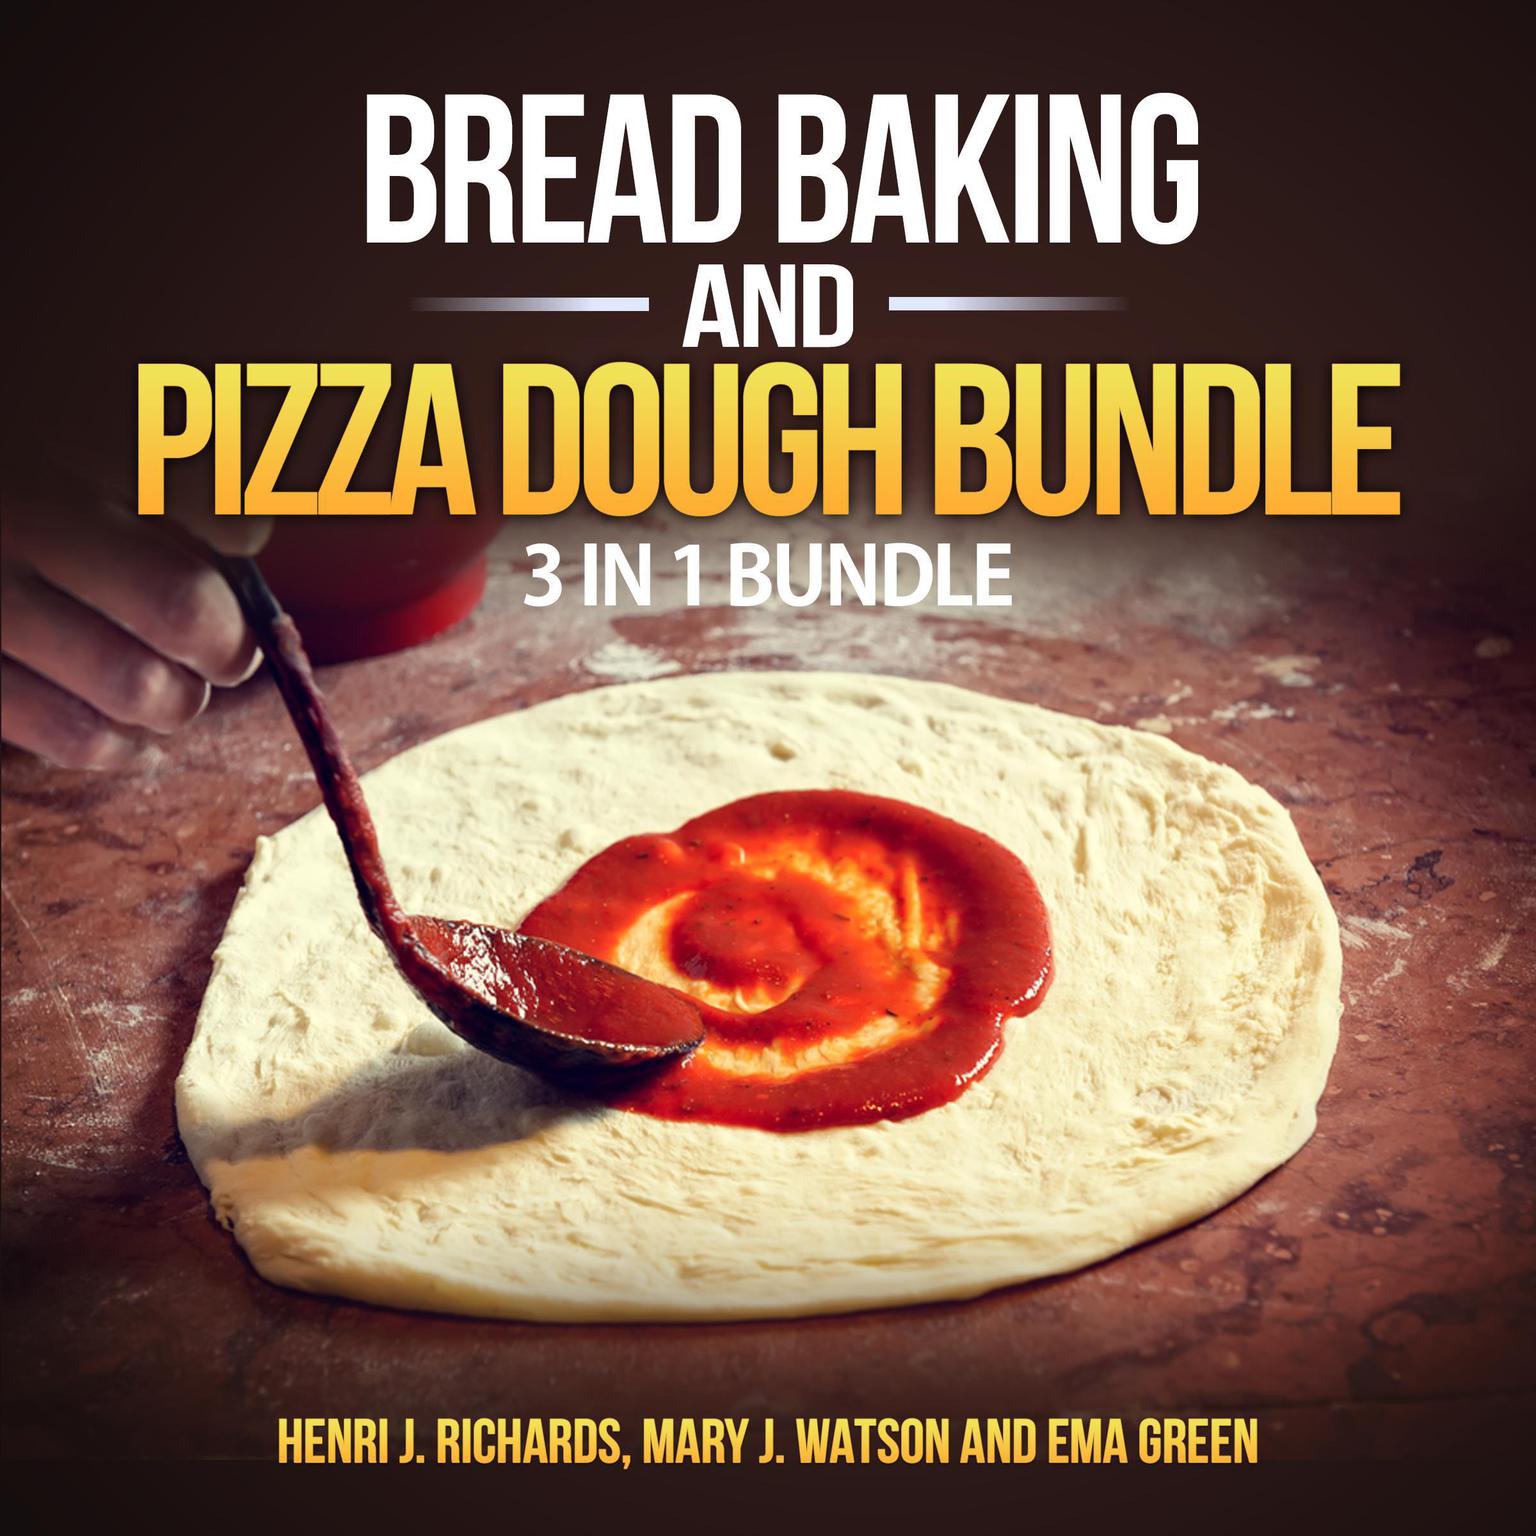 Bread baking and Pizza Dough Bundle: 3 in 1 Bundle, Bread, Pizza Dough, How to Bake Everything Audiobook, by Henri J. Richards